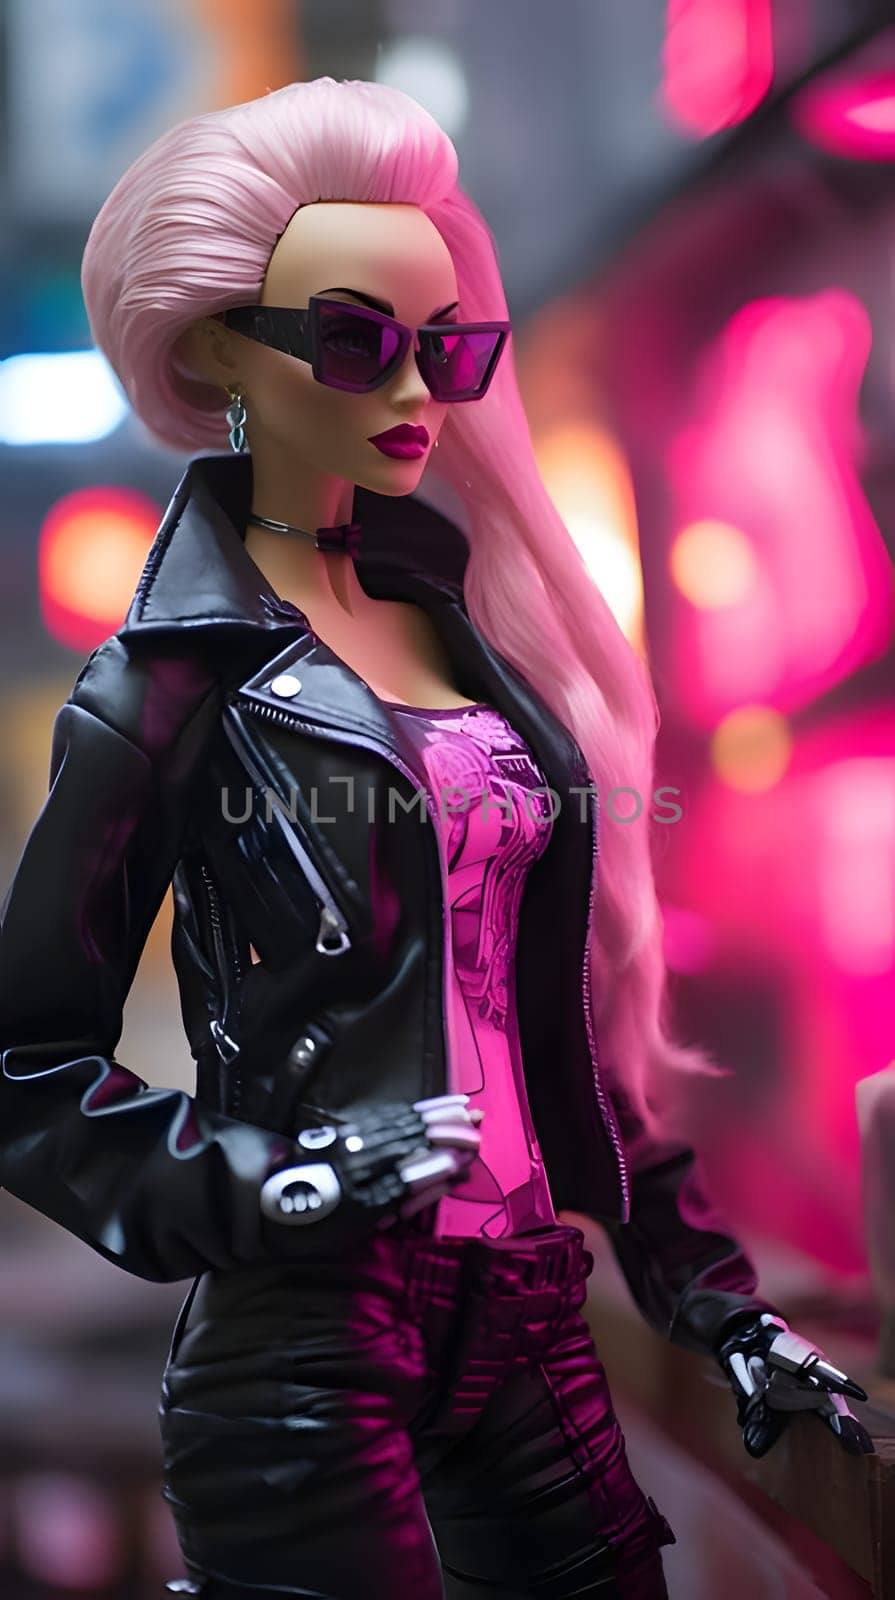 Cute blonde Barbie wearing black outfit, stands next to his motorcycle, against blurred pink background. by ThemesS